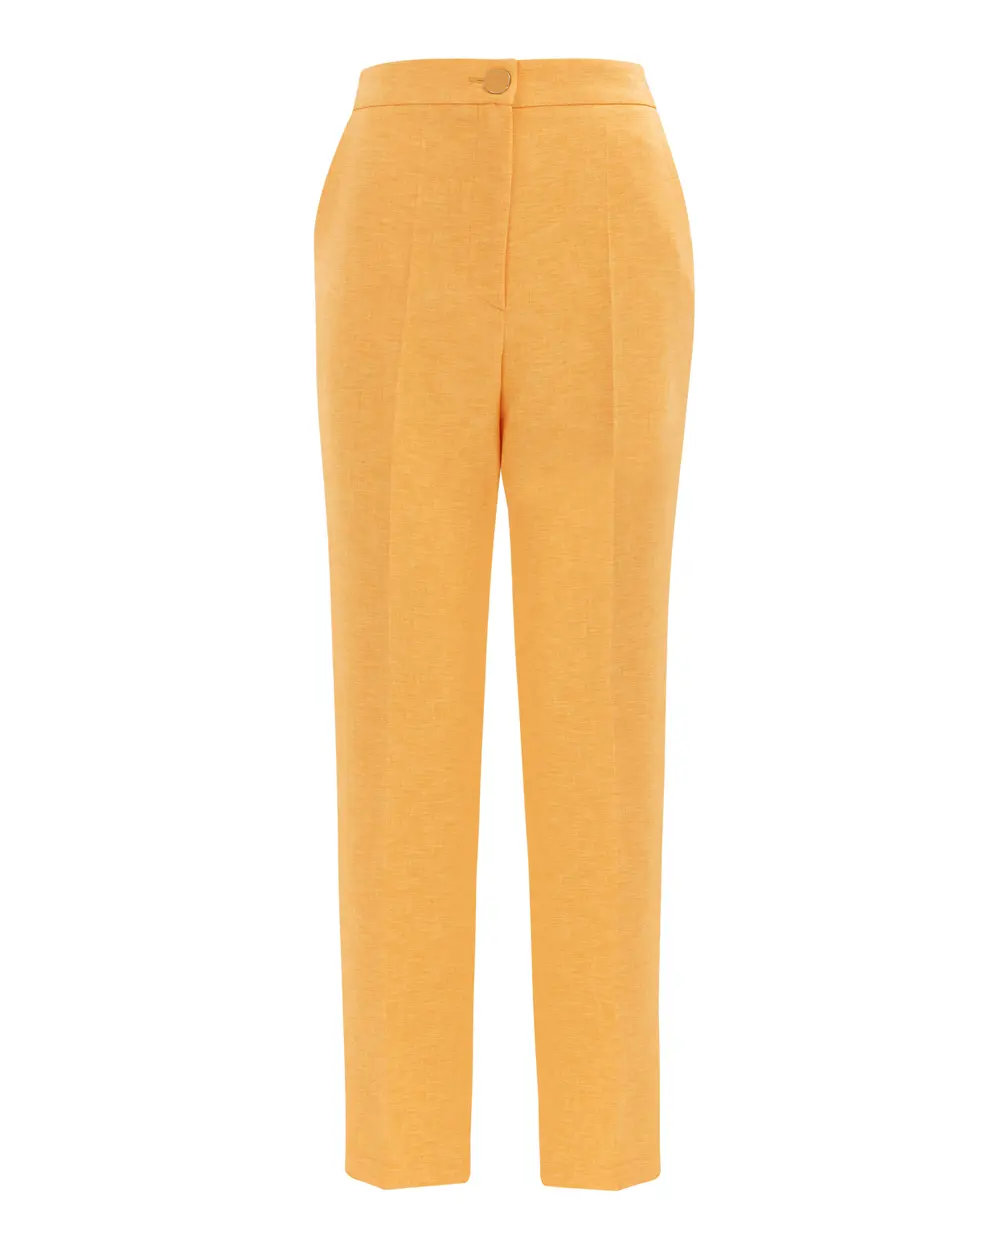 Ankle Length Pants with Pockets